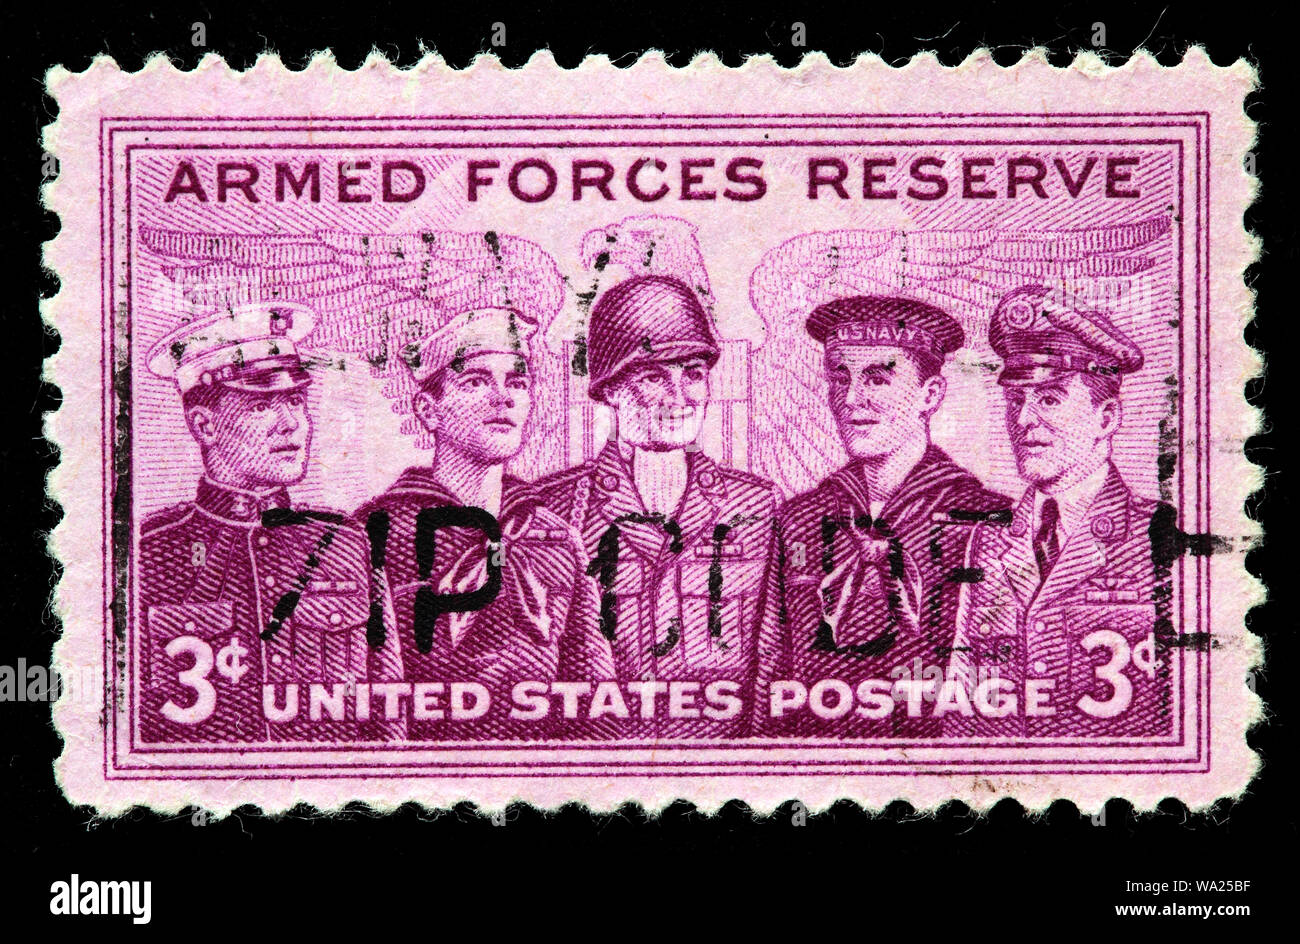 Armed forces reserve, Marine, Coast Guard, Army, Navy, and Air Force Personnel, postage stamp, USA, 1955 Stock Photo